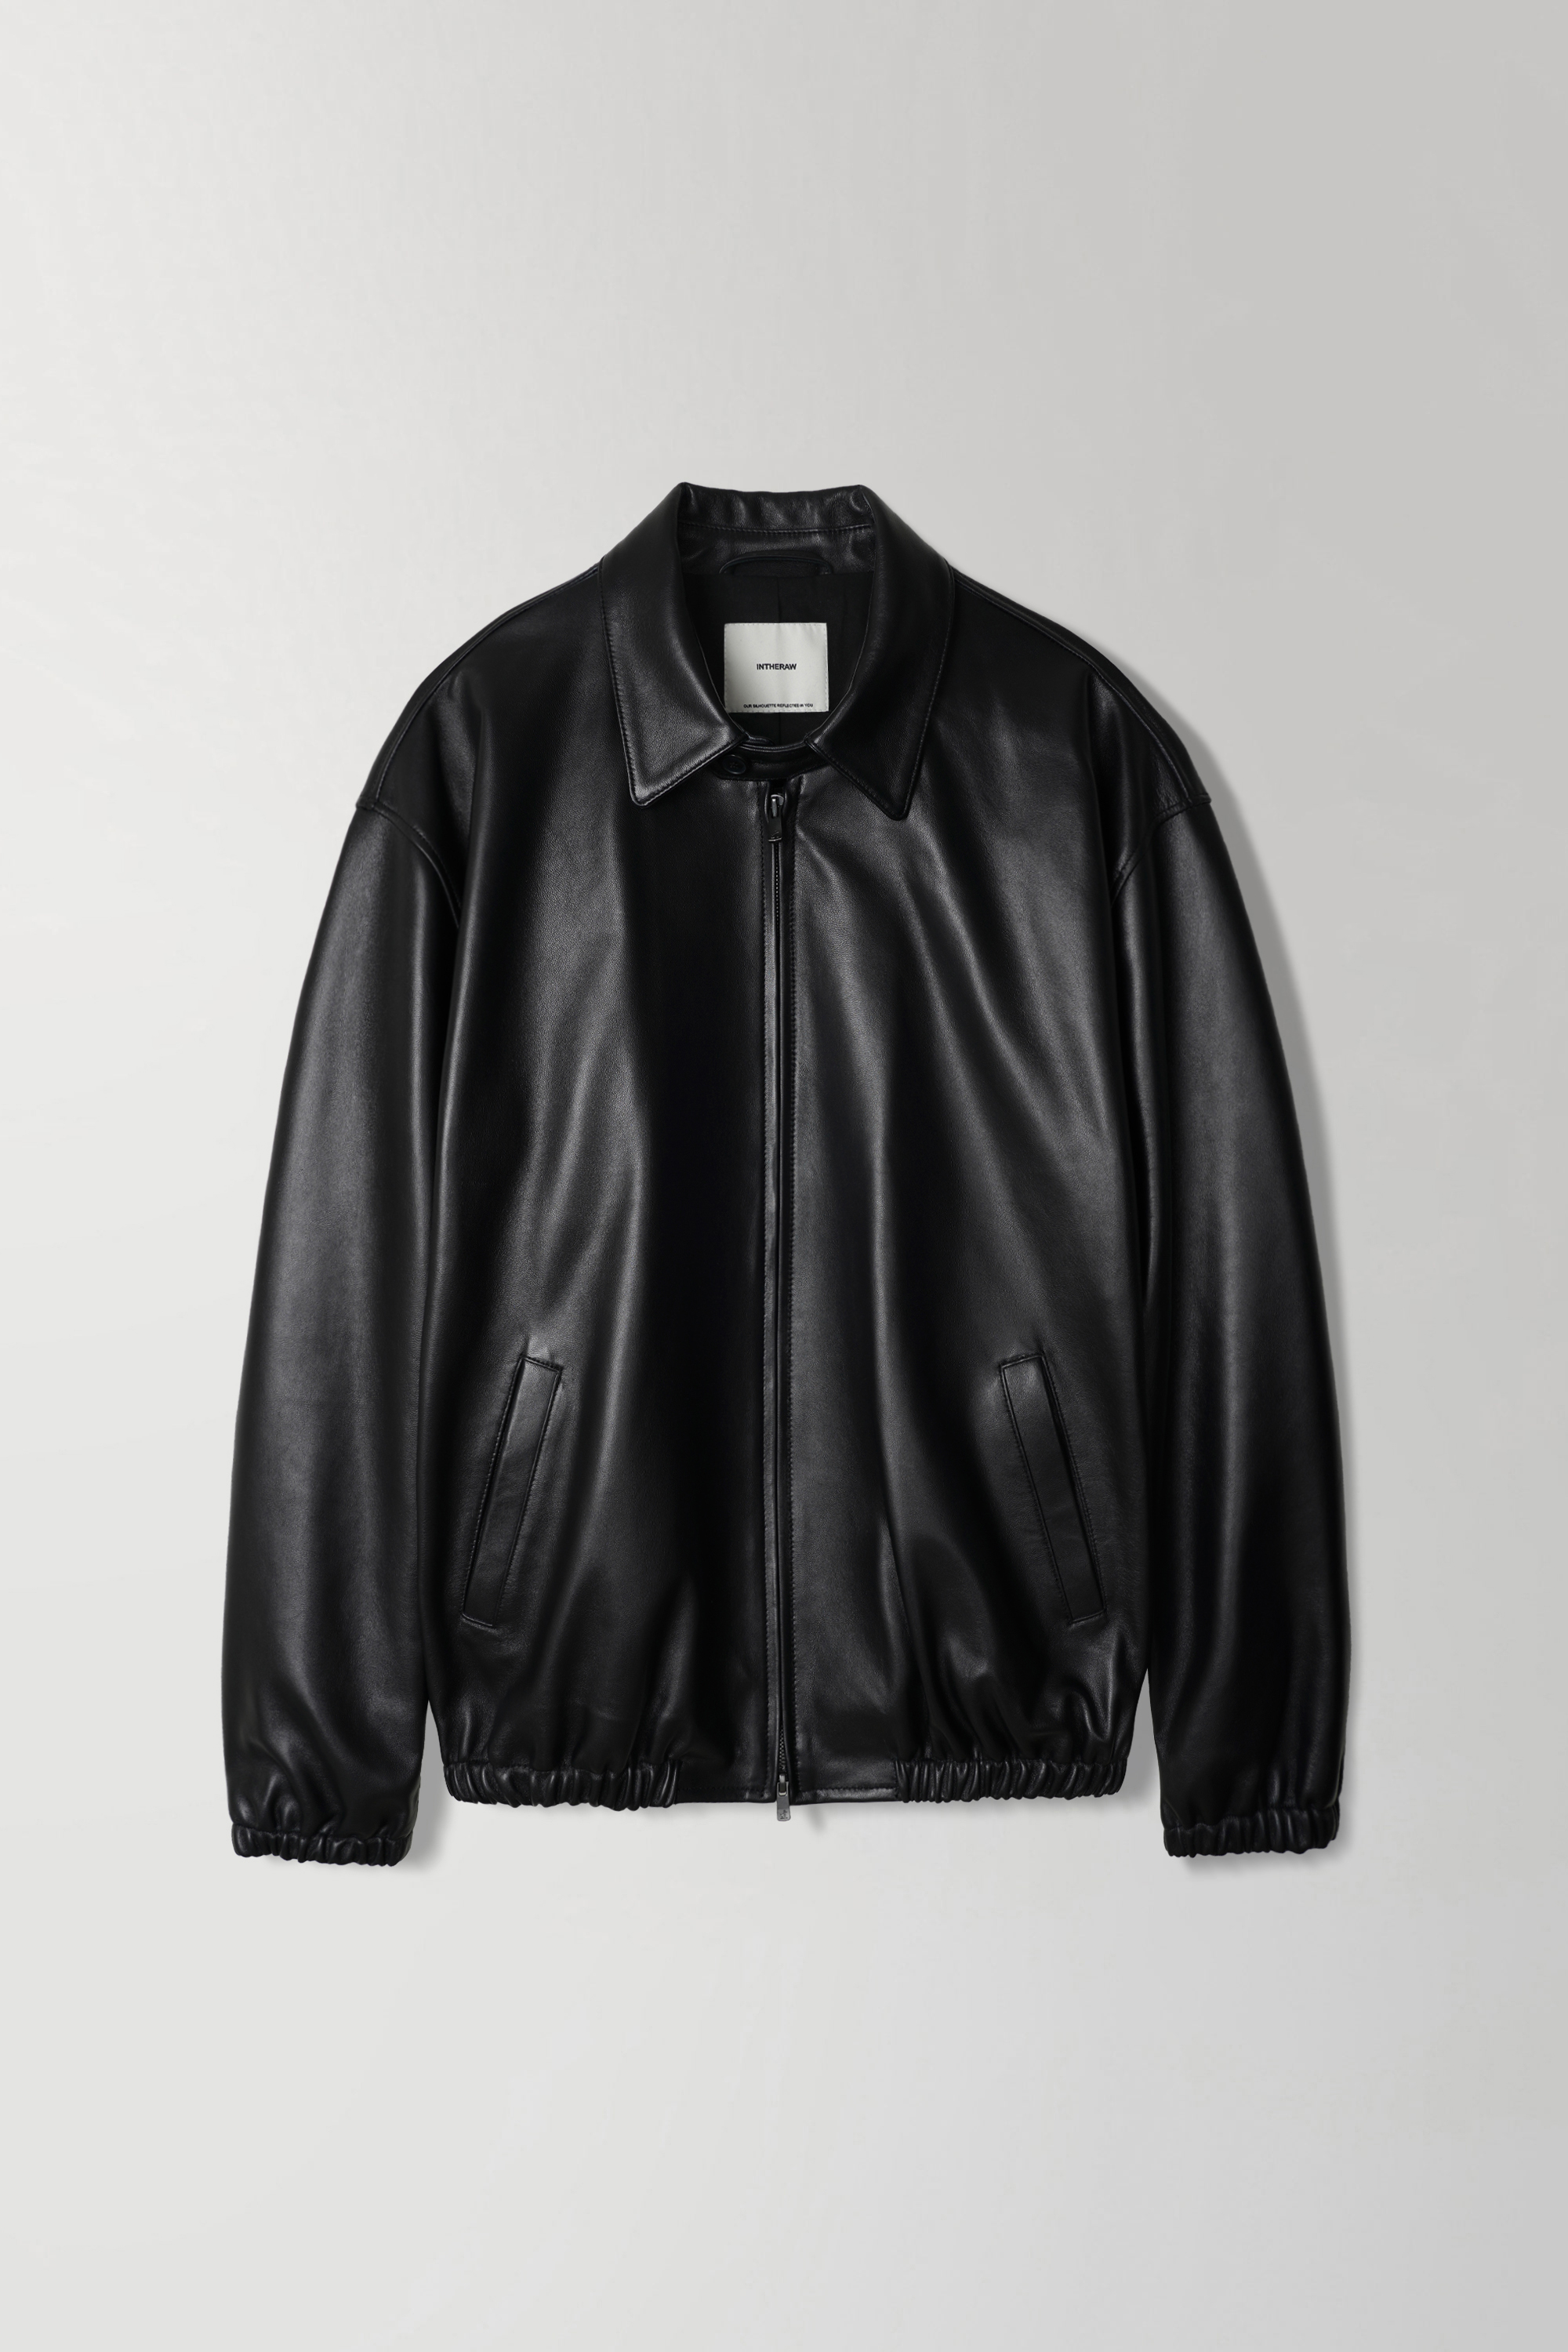 [2ND] LEATHER SWING TOP JACKET - BLACK